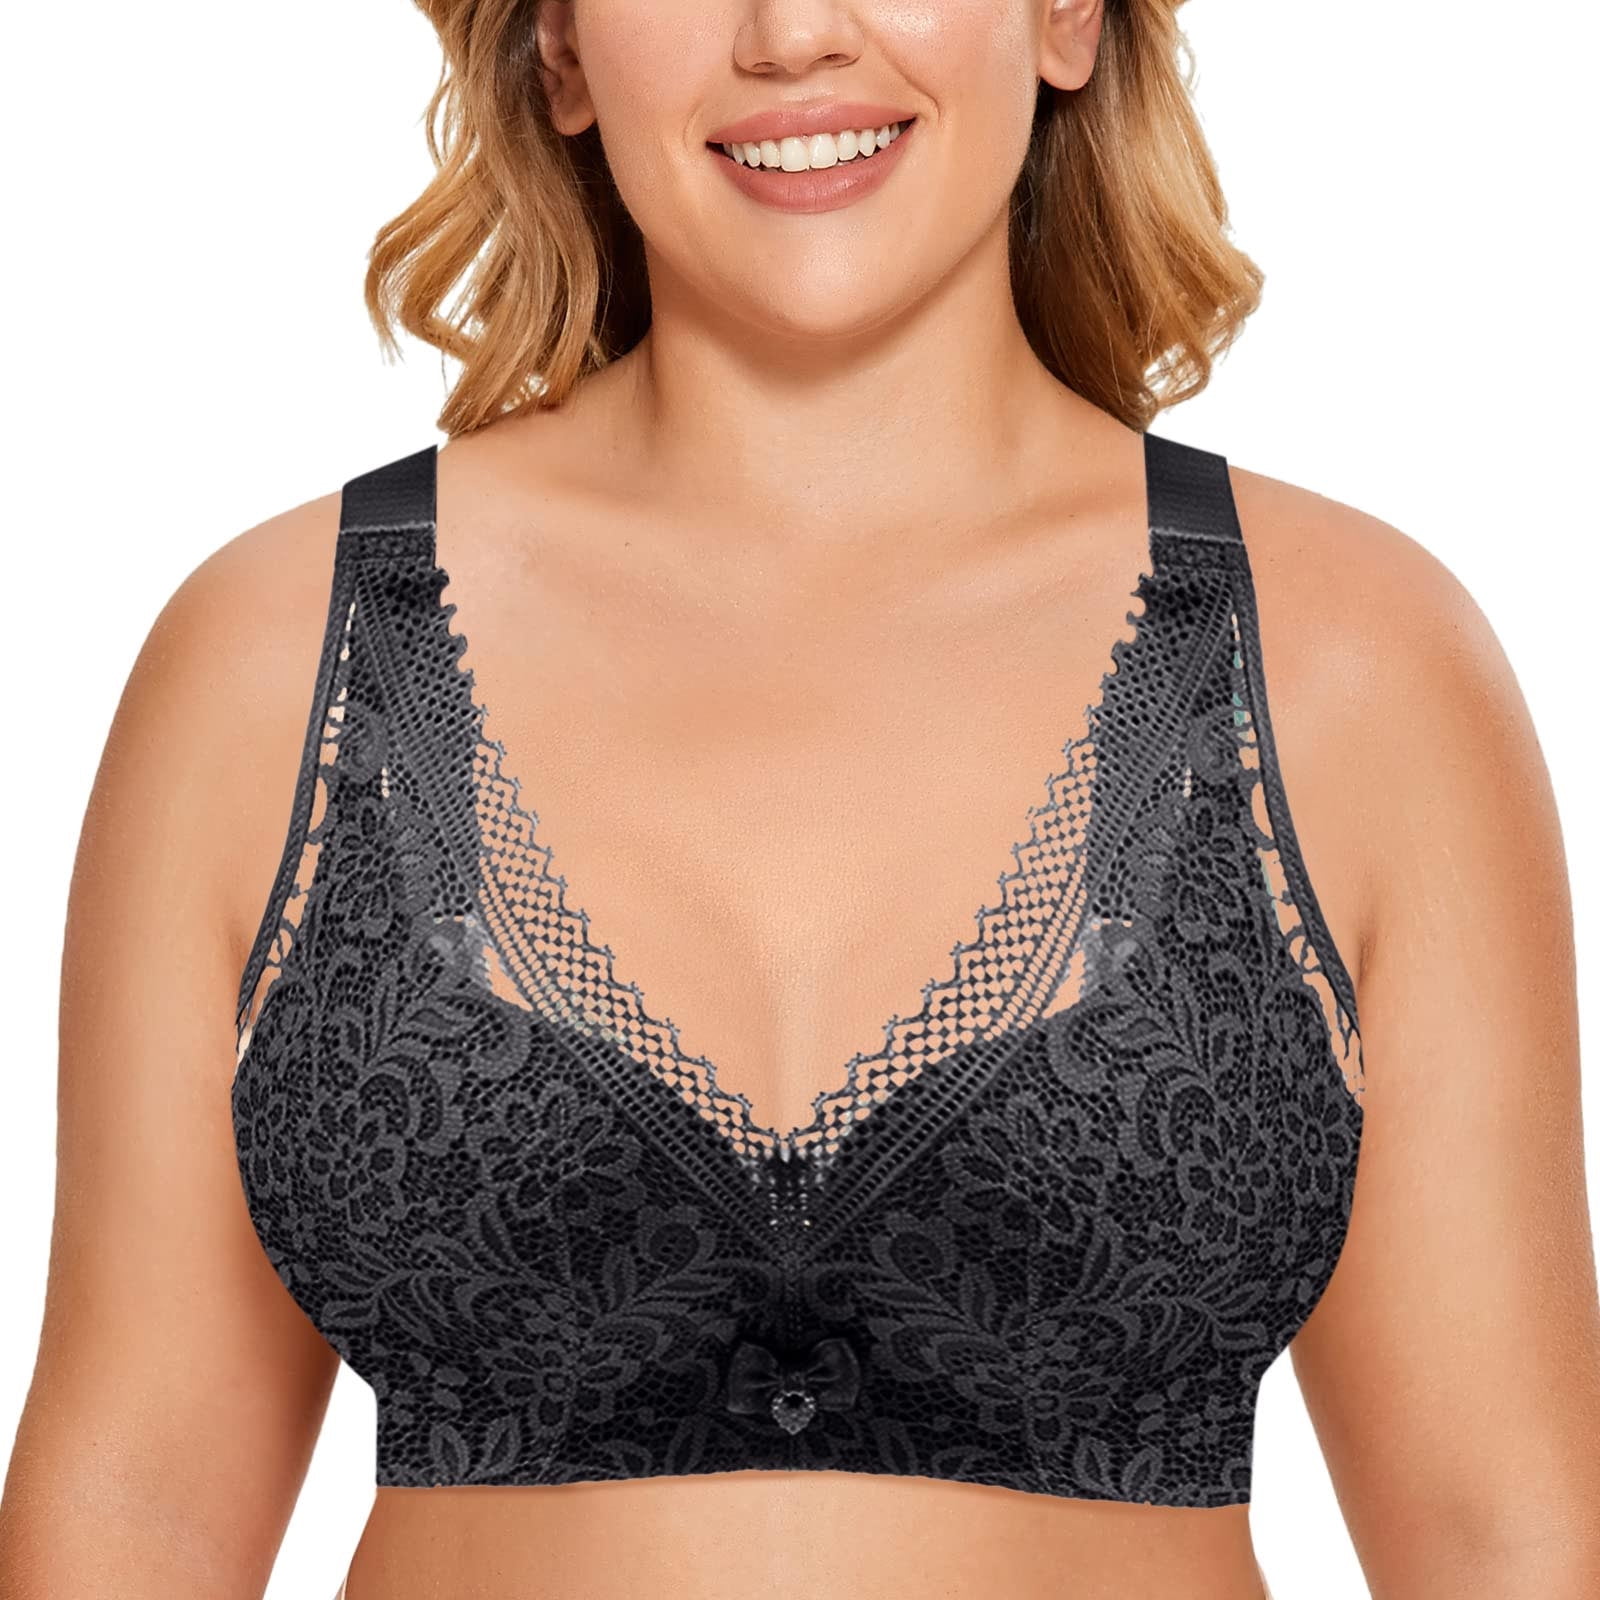 kpoplk Wireless Bras For Women,Womens Push Up Padded Bra Front Closure  Underwire Plunge Bra Floral Lace Racerback T-Back Smooth T Shirt Bra(Black)  